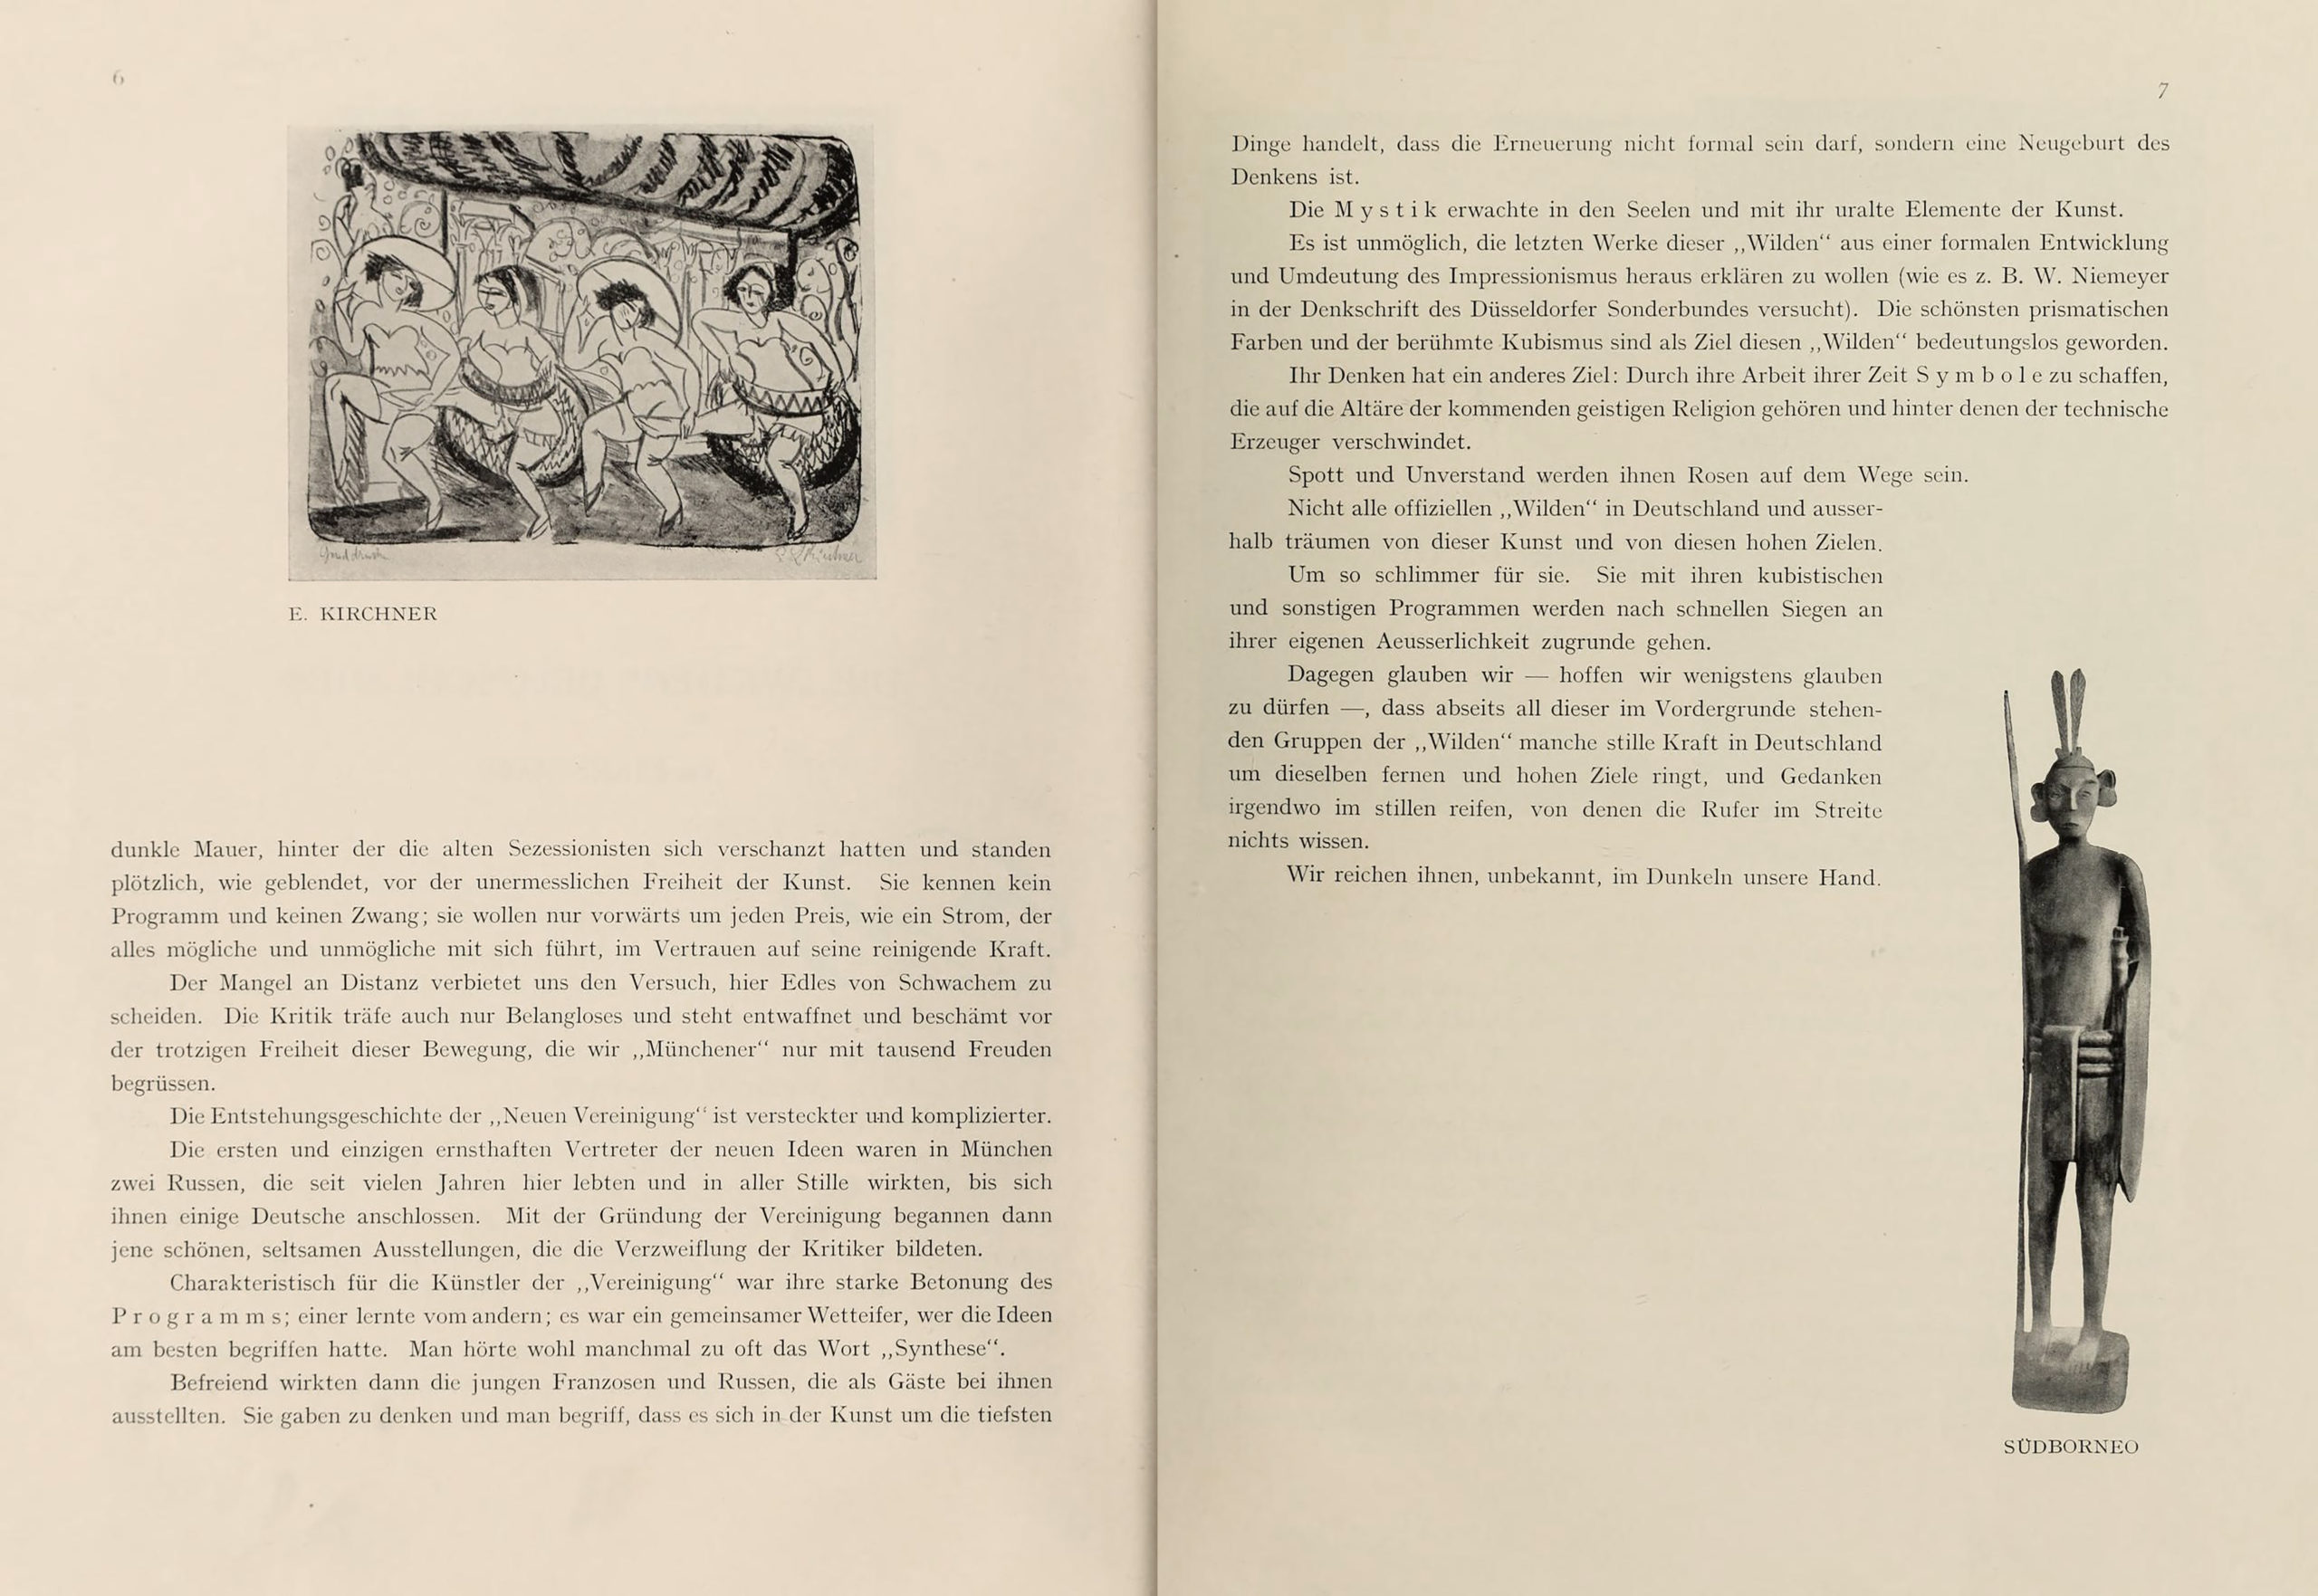 Blaue Reiter pages with Ernst Ludwig Kirchner's Four Women Dancing, 1910 and South Borneo statue, pp. 6-7